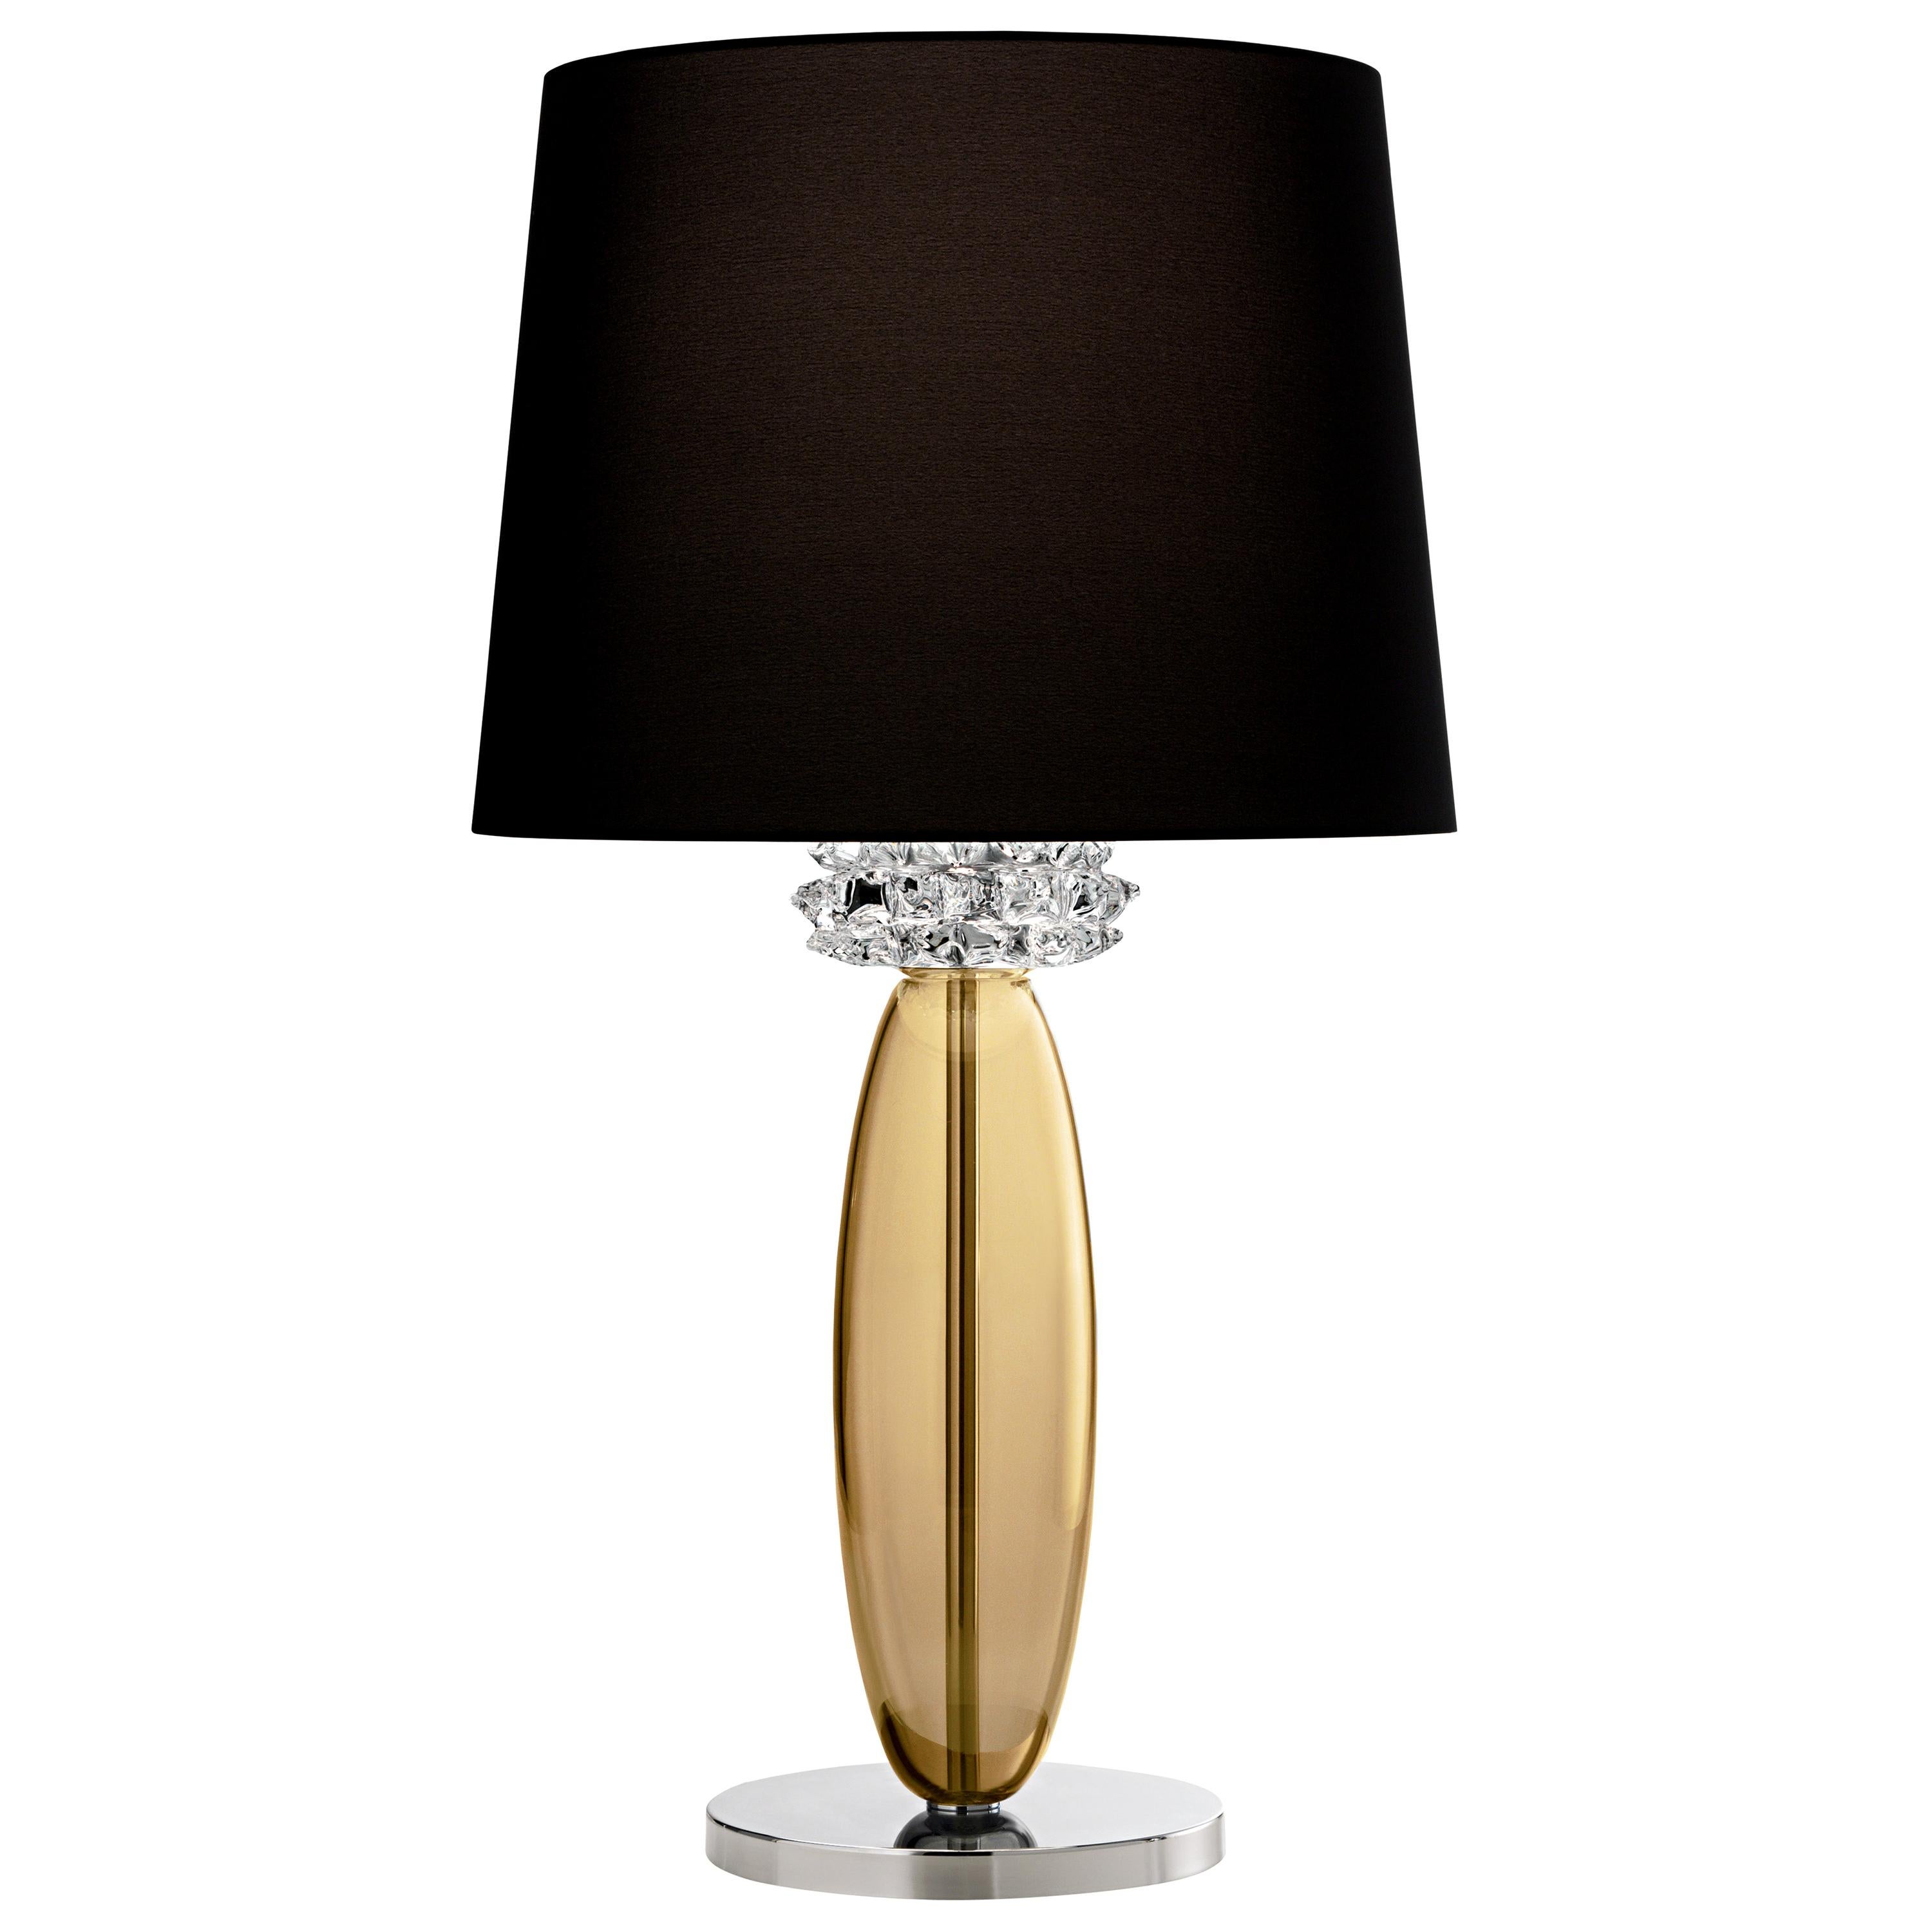 Orange (Caramel_CA) Rotterdam 5565 Table Lamp in Glass with Black Shade, by Barovier&Toso